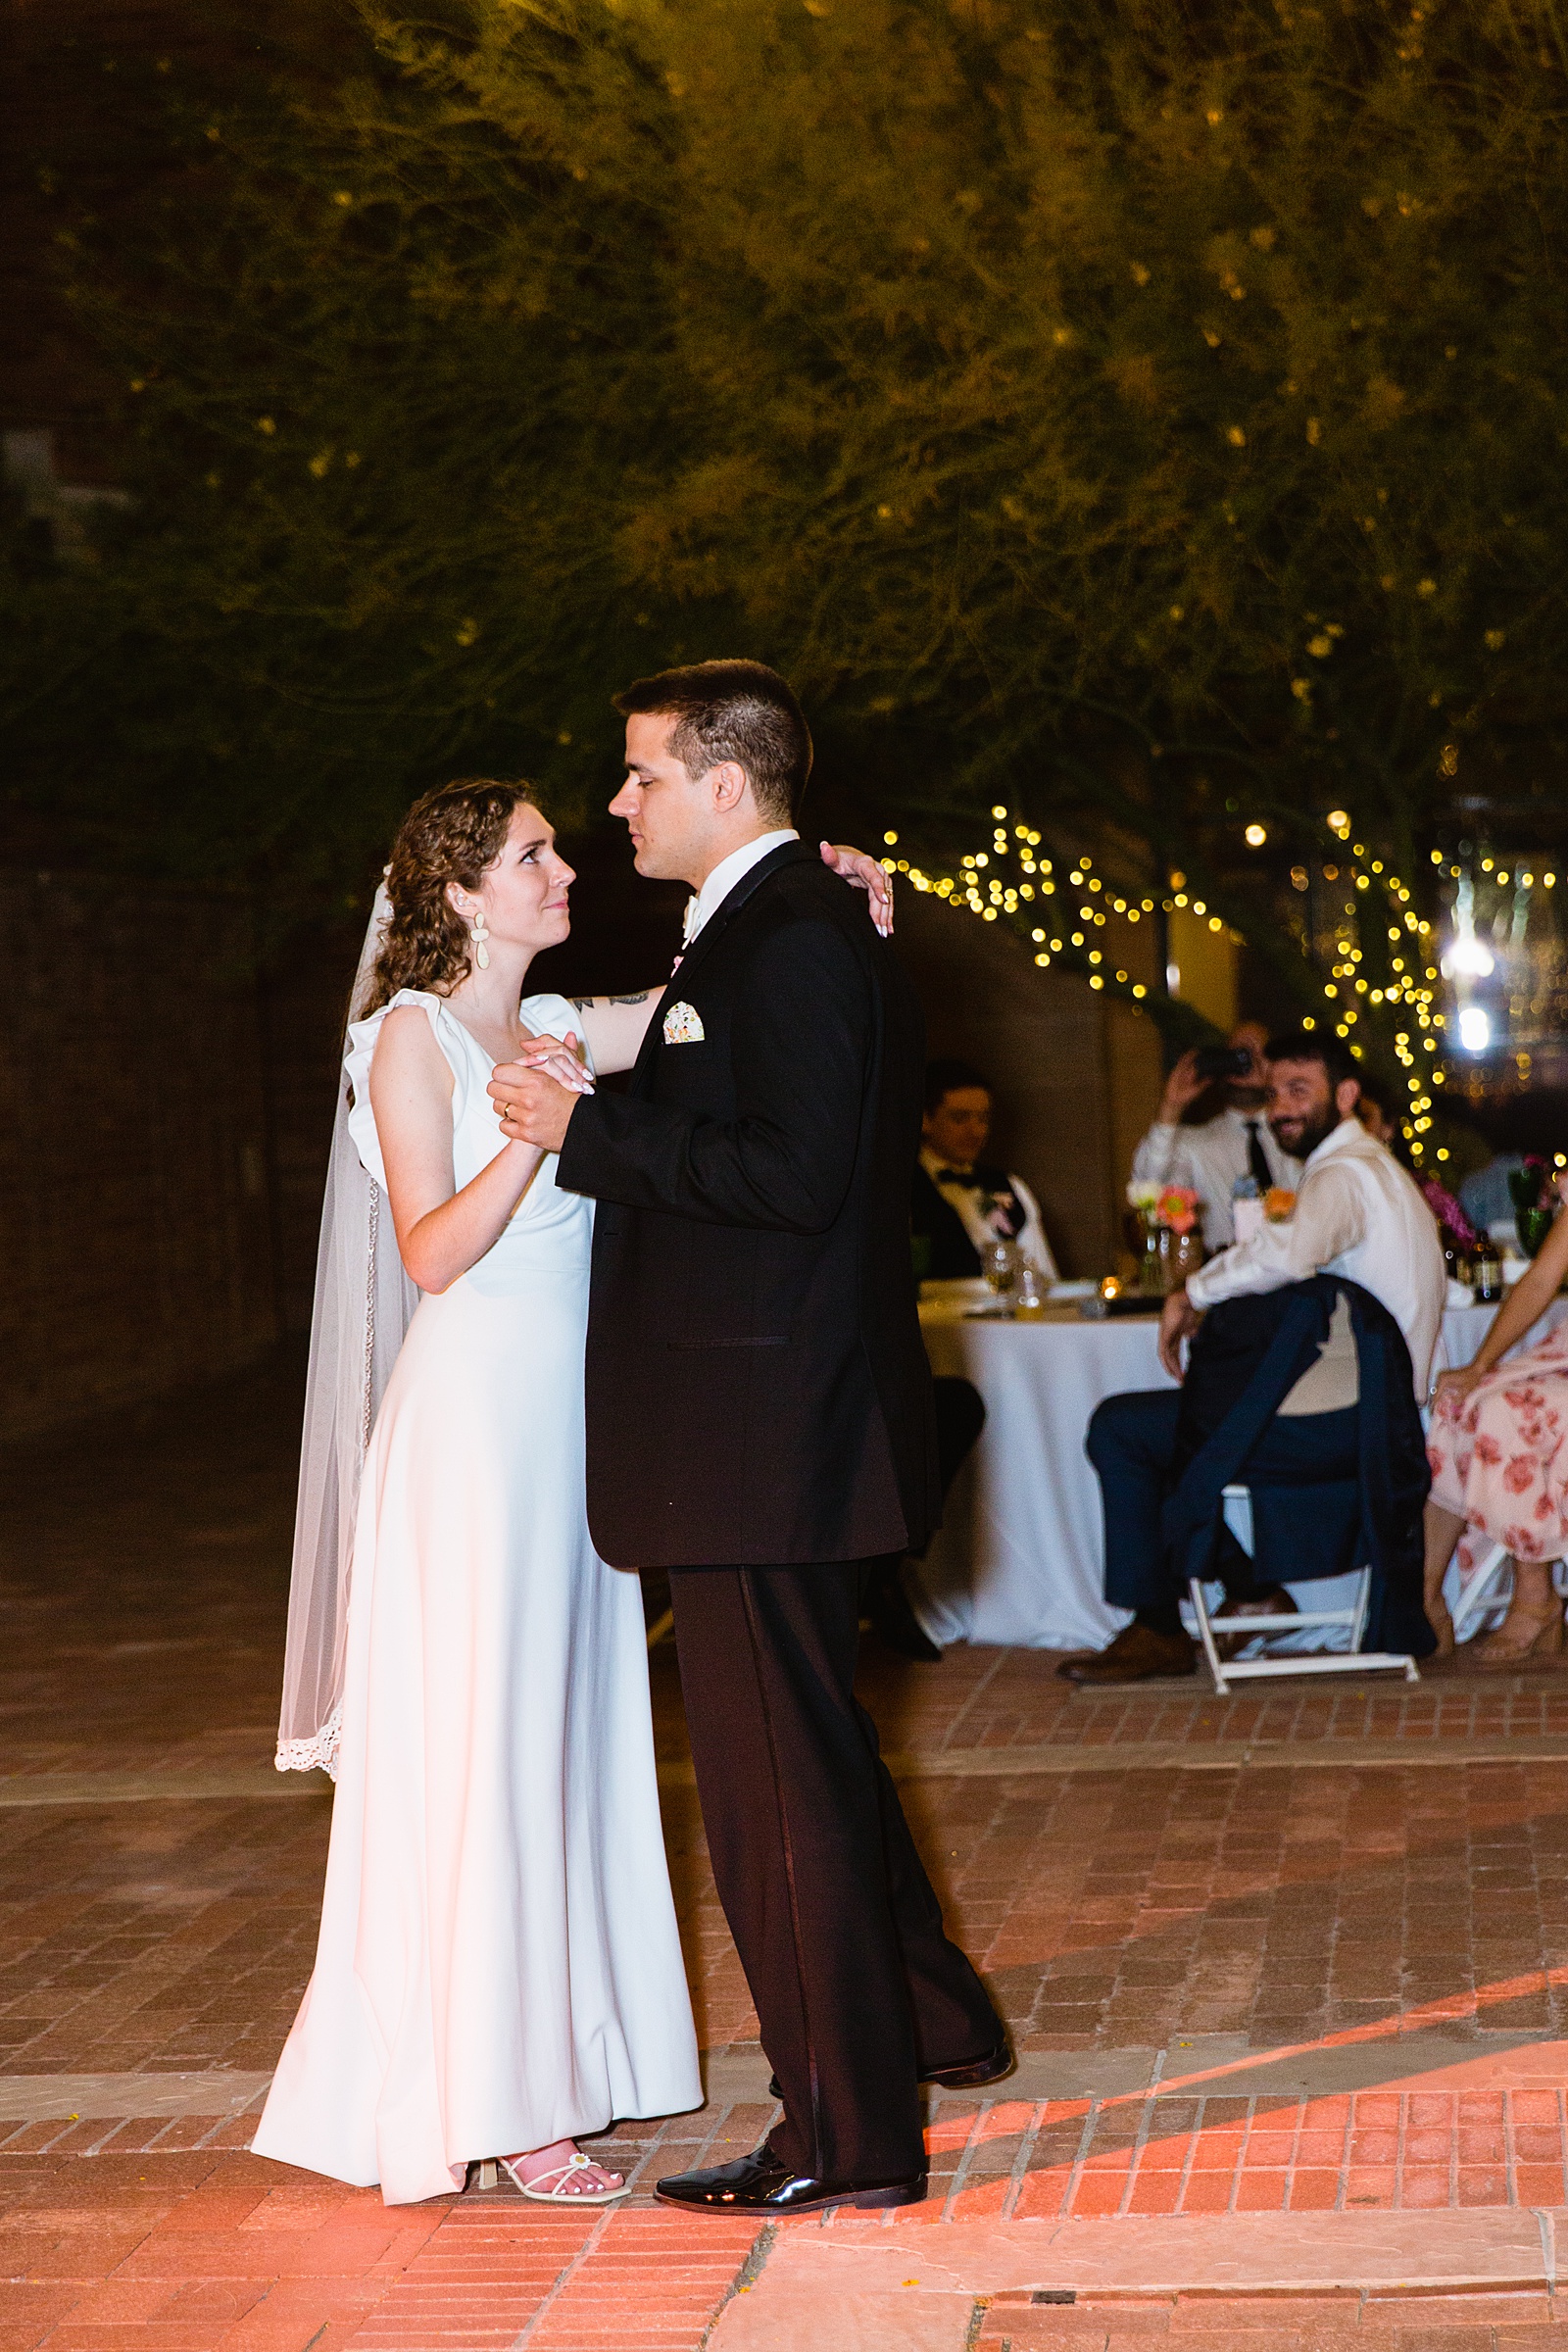 Bride and groom sharing first dance at their Arizona Historical Society wedding reception by Arizona wedding photographer PMA Photography.